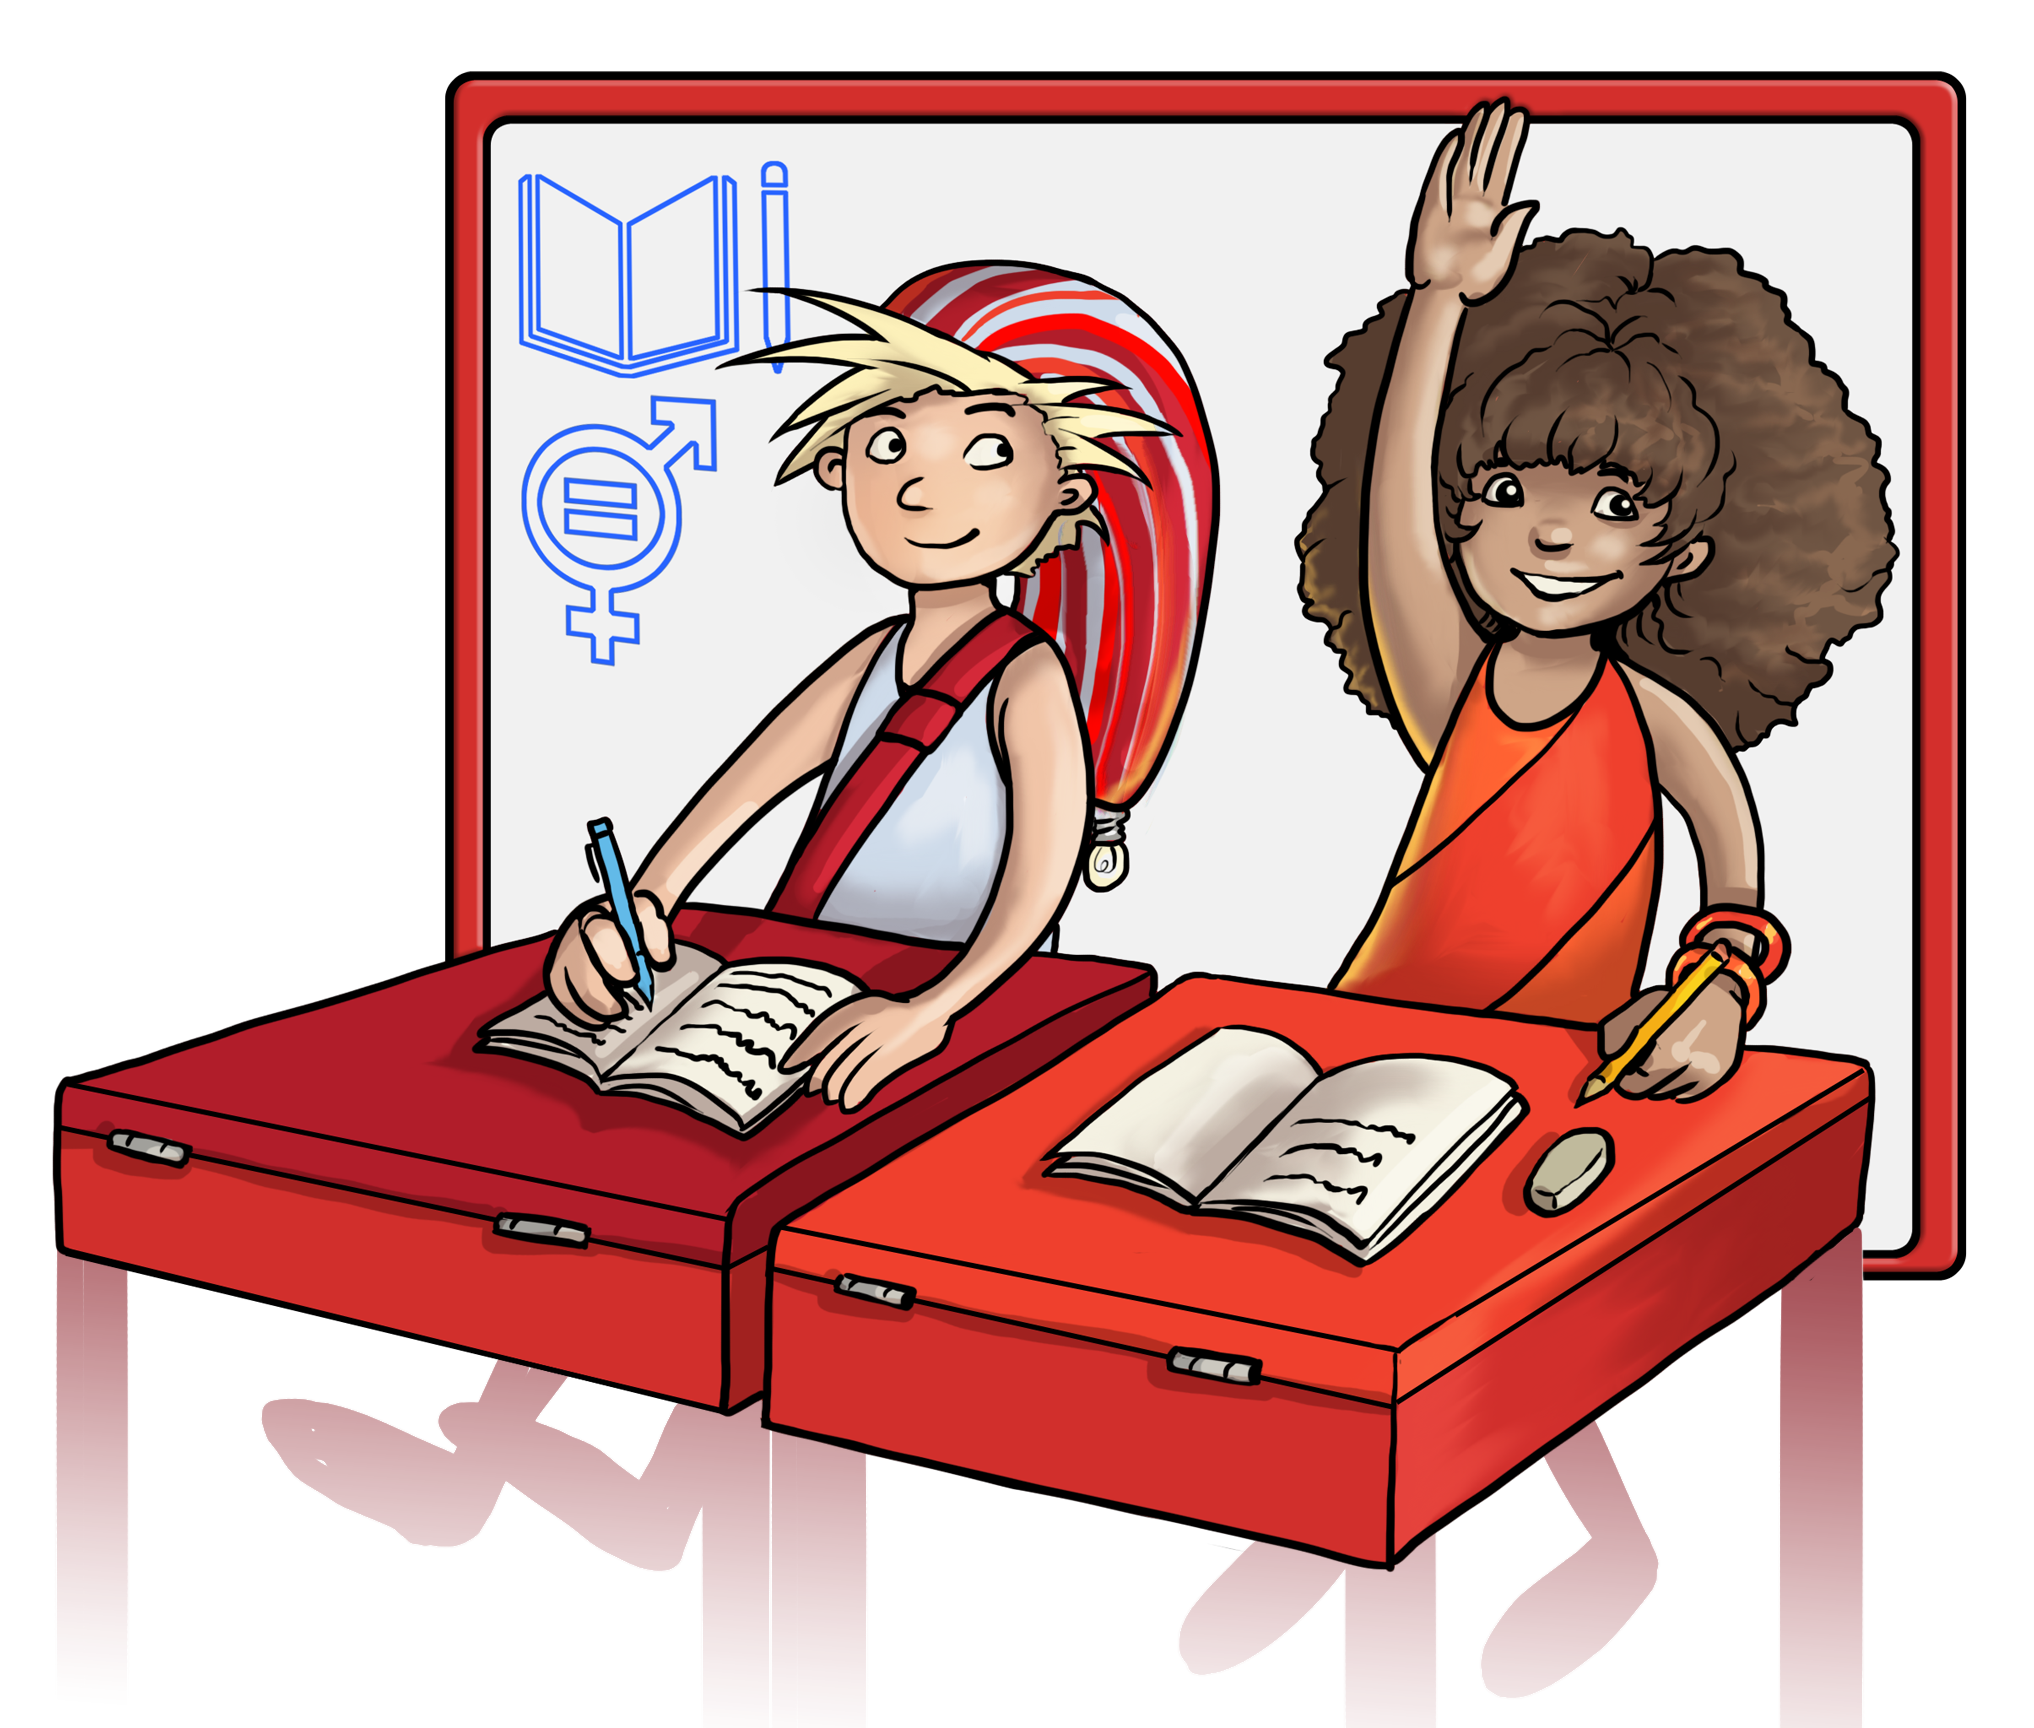 Illustration. Two children are sitting in a school bench.